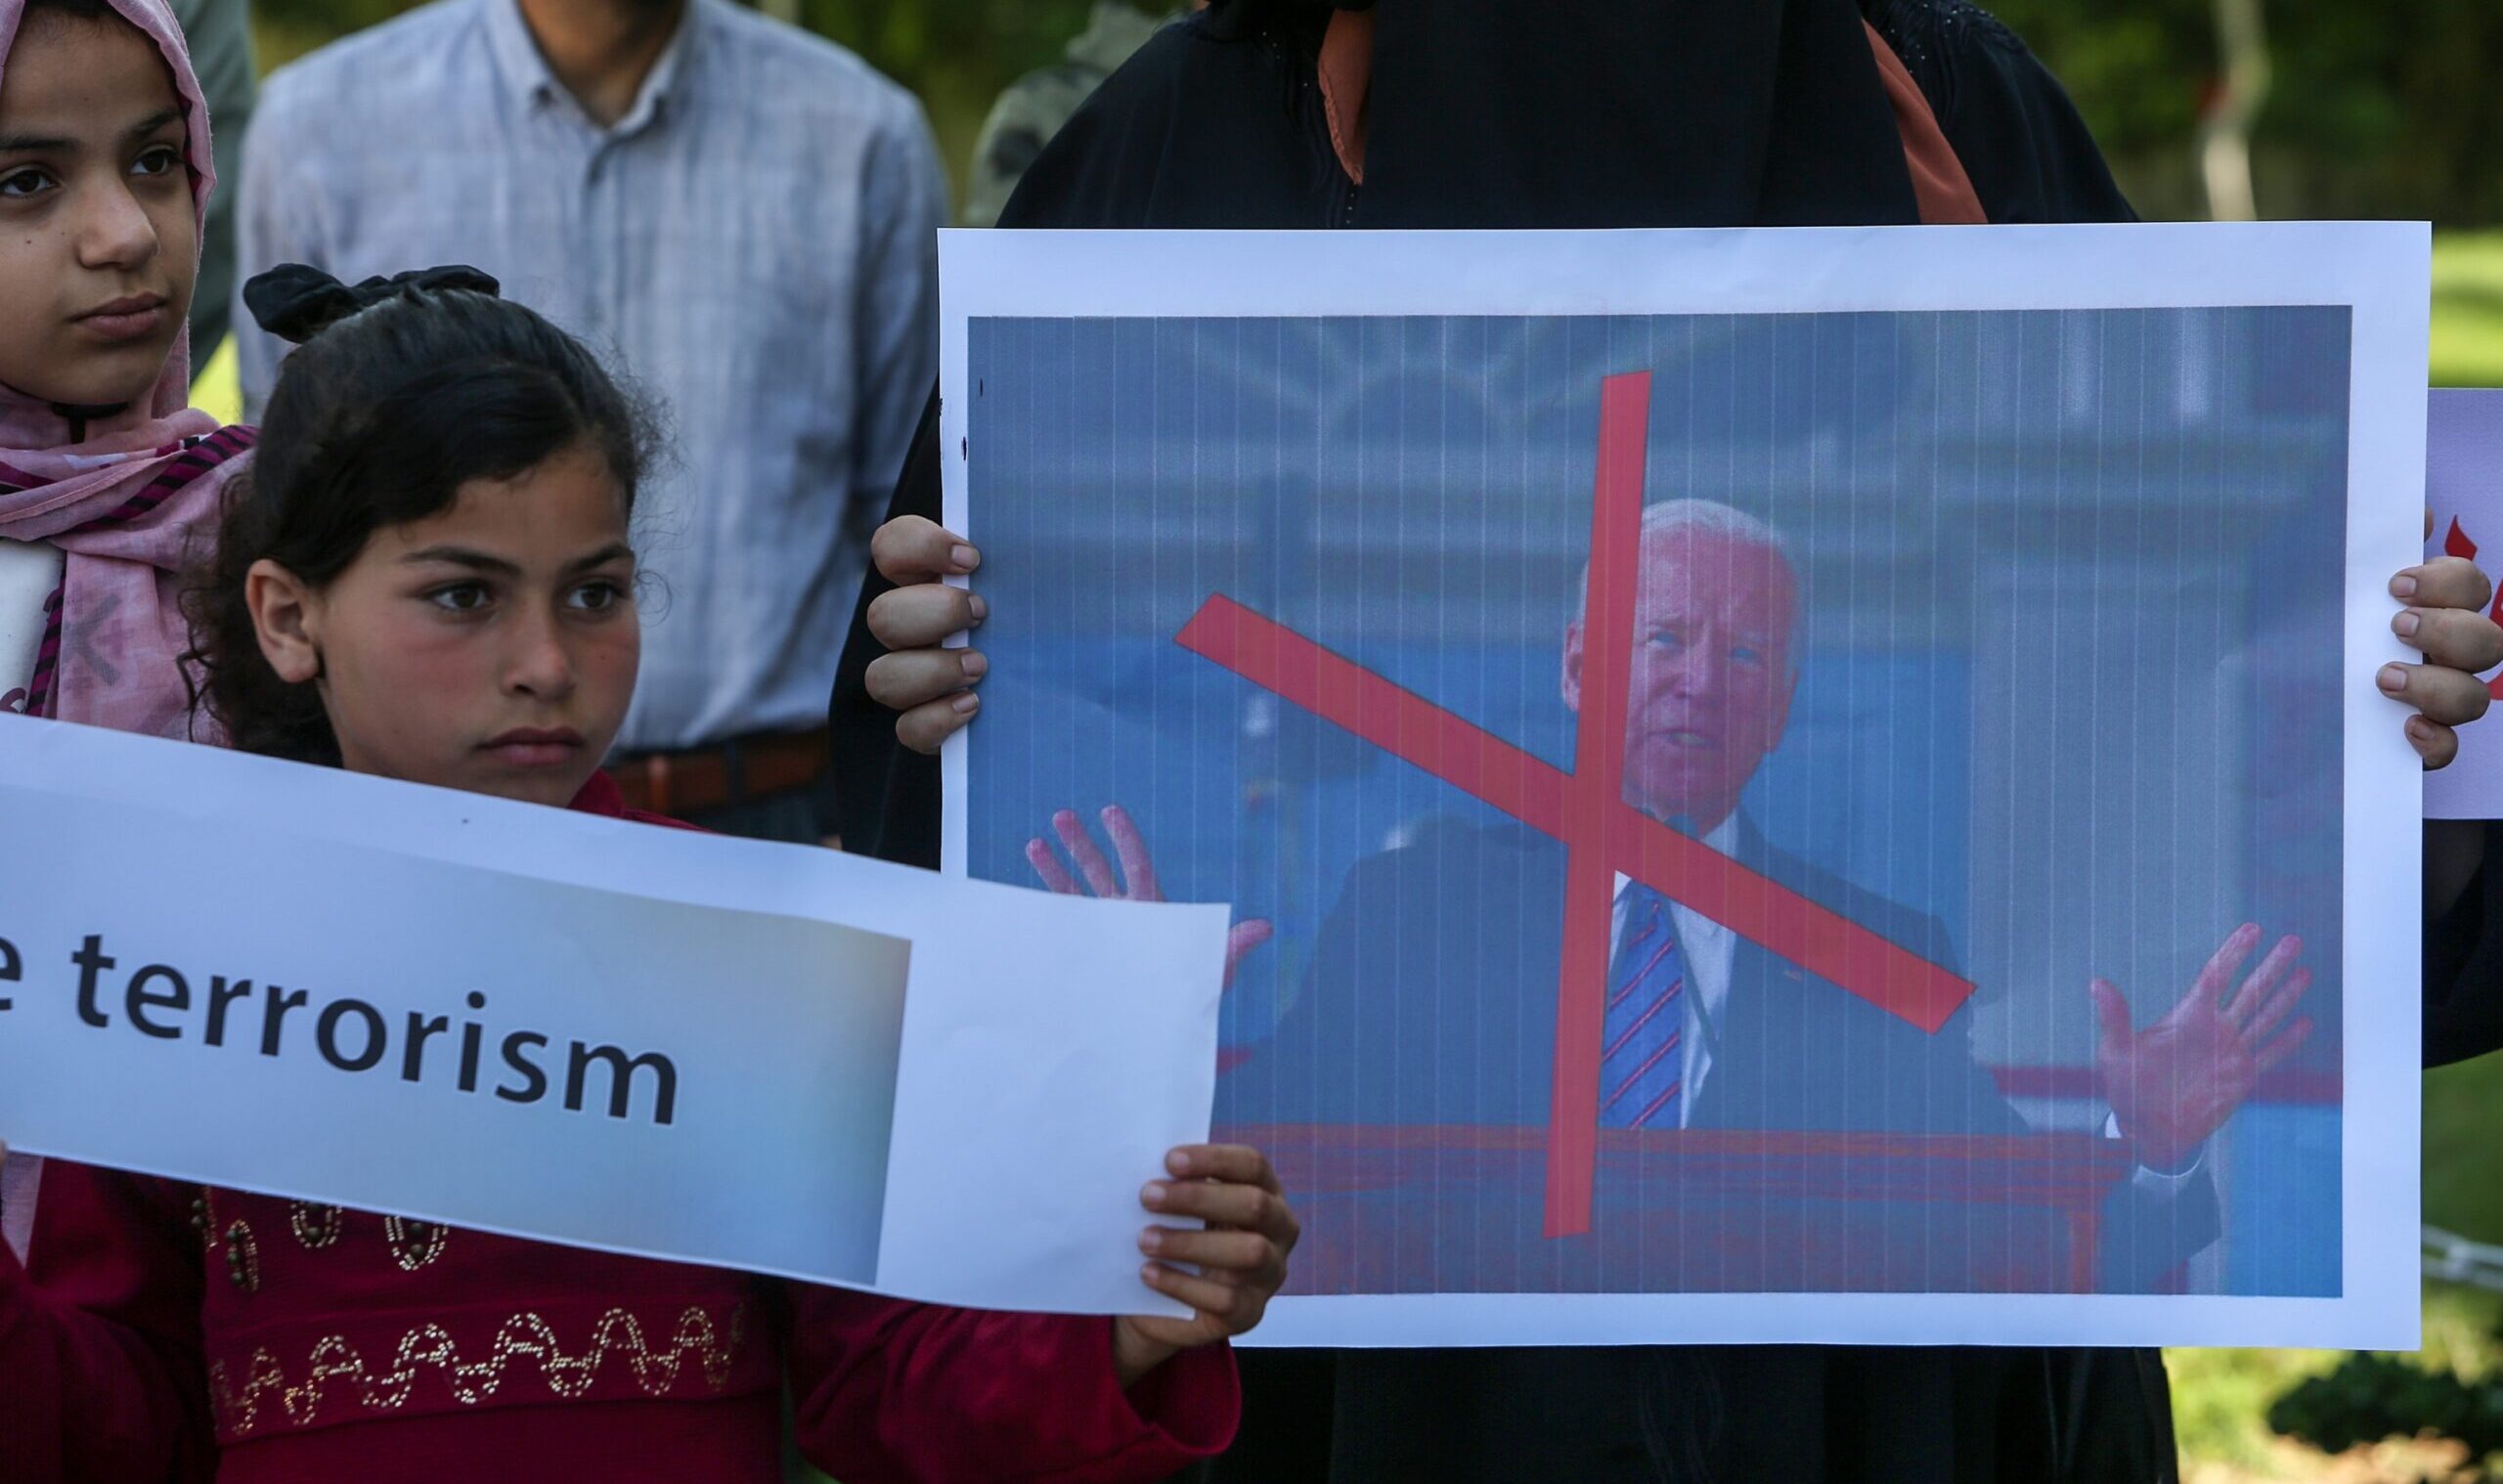 Biden Makes Americans Targets in the Middle East, Then Campaigns on Their Deaths